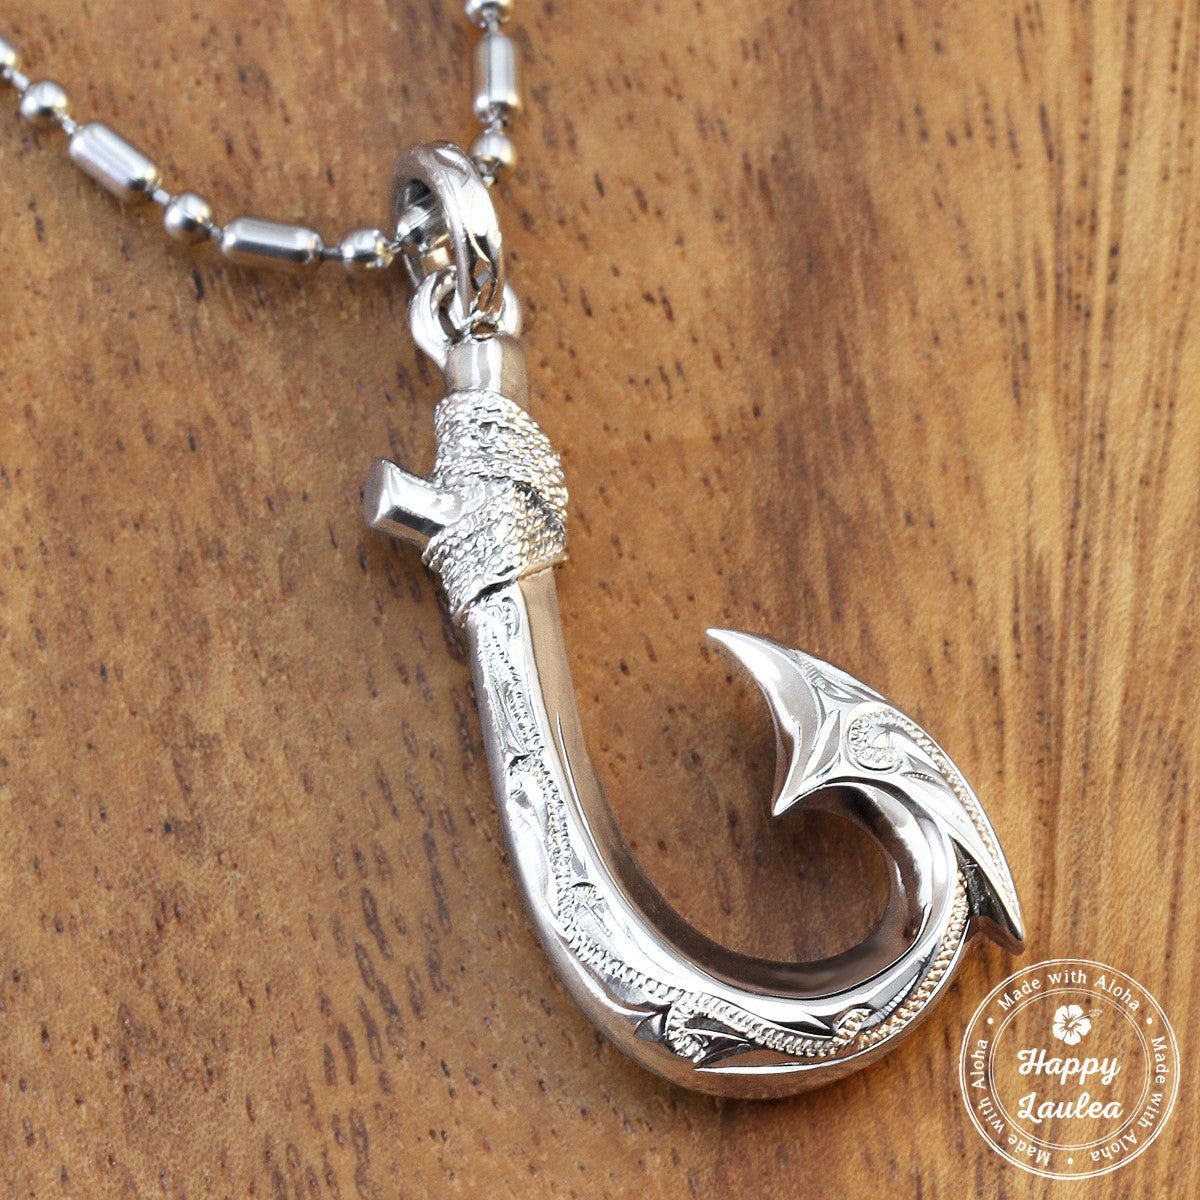 Hook necklace for men, men's necklace with silver hook pendant, silver  chain, fisherman, fish hook, men's necklace, nautical, groomsmen gift